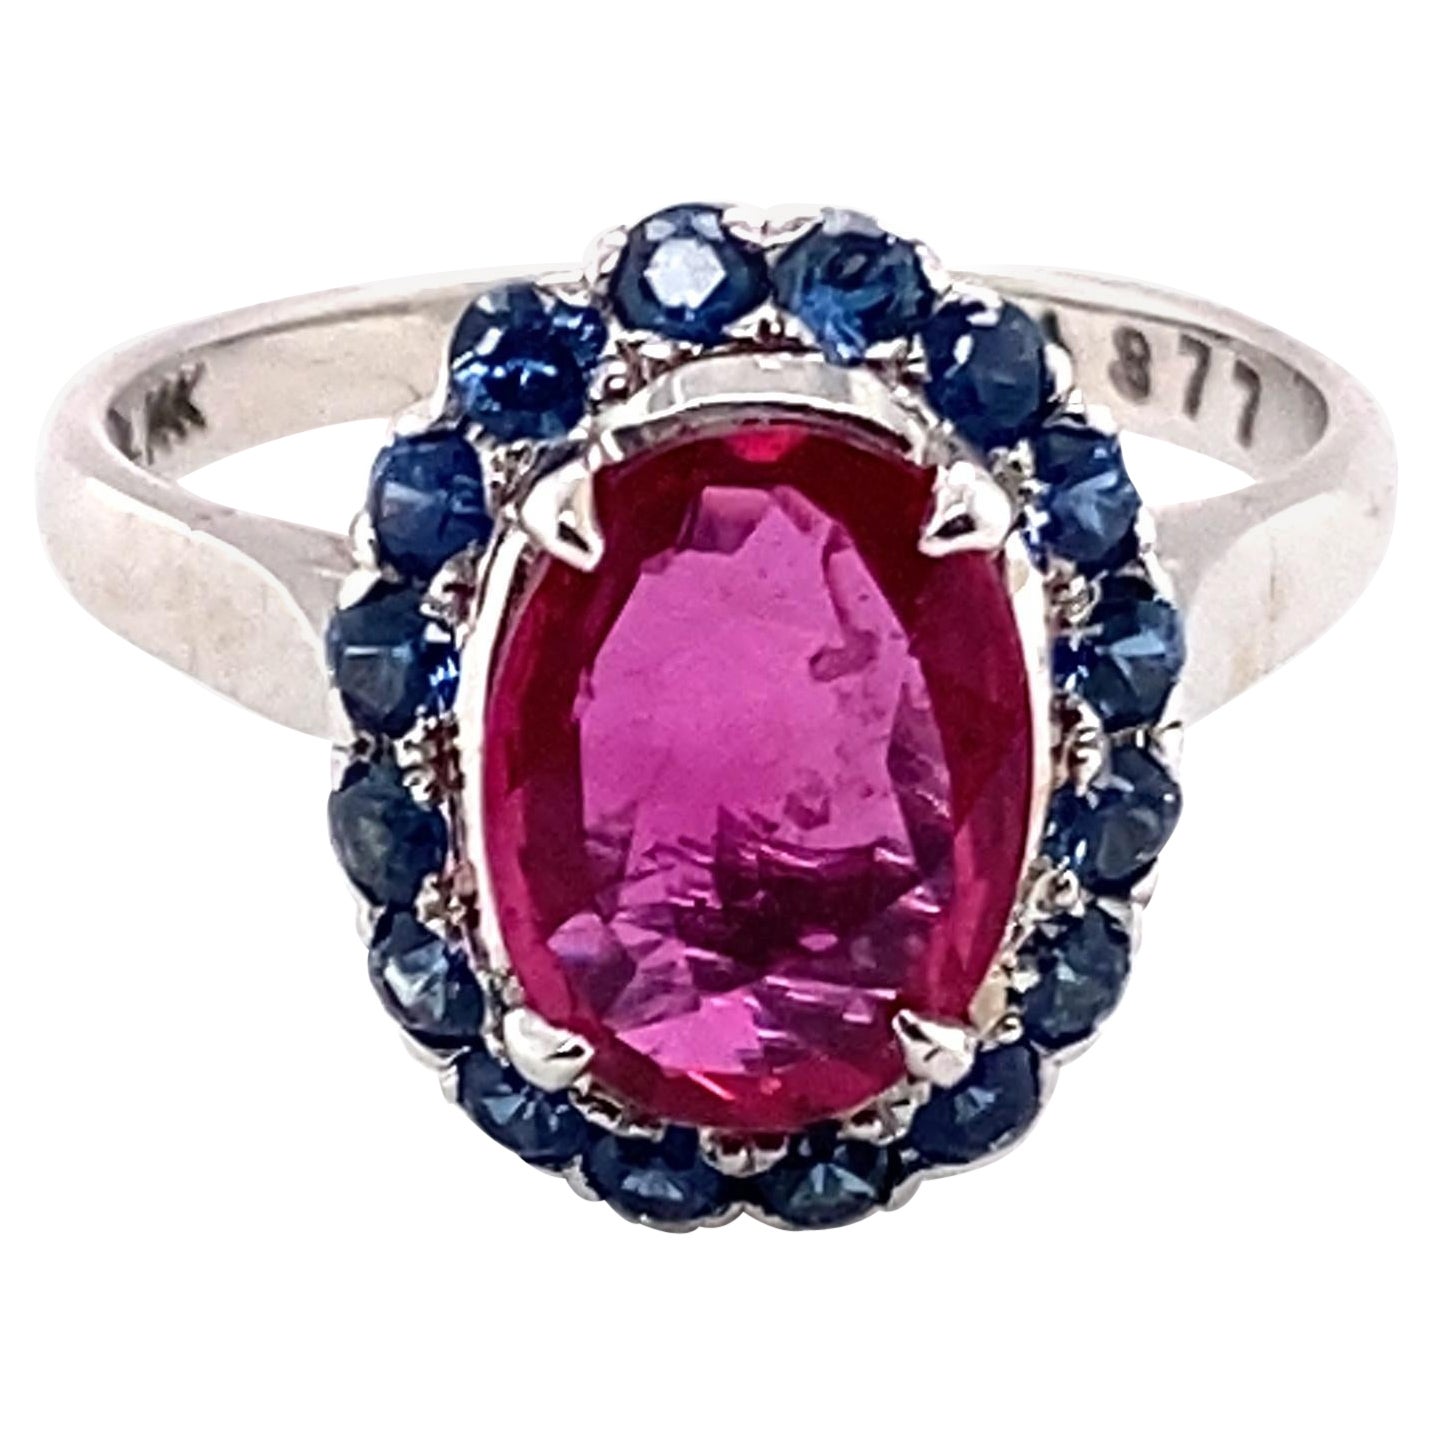 1.56 Carat Total Ruby and 1.14 Carat Total Sapphire Ring in 14 Karat White Gold For Sale